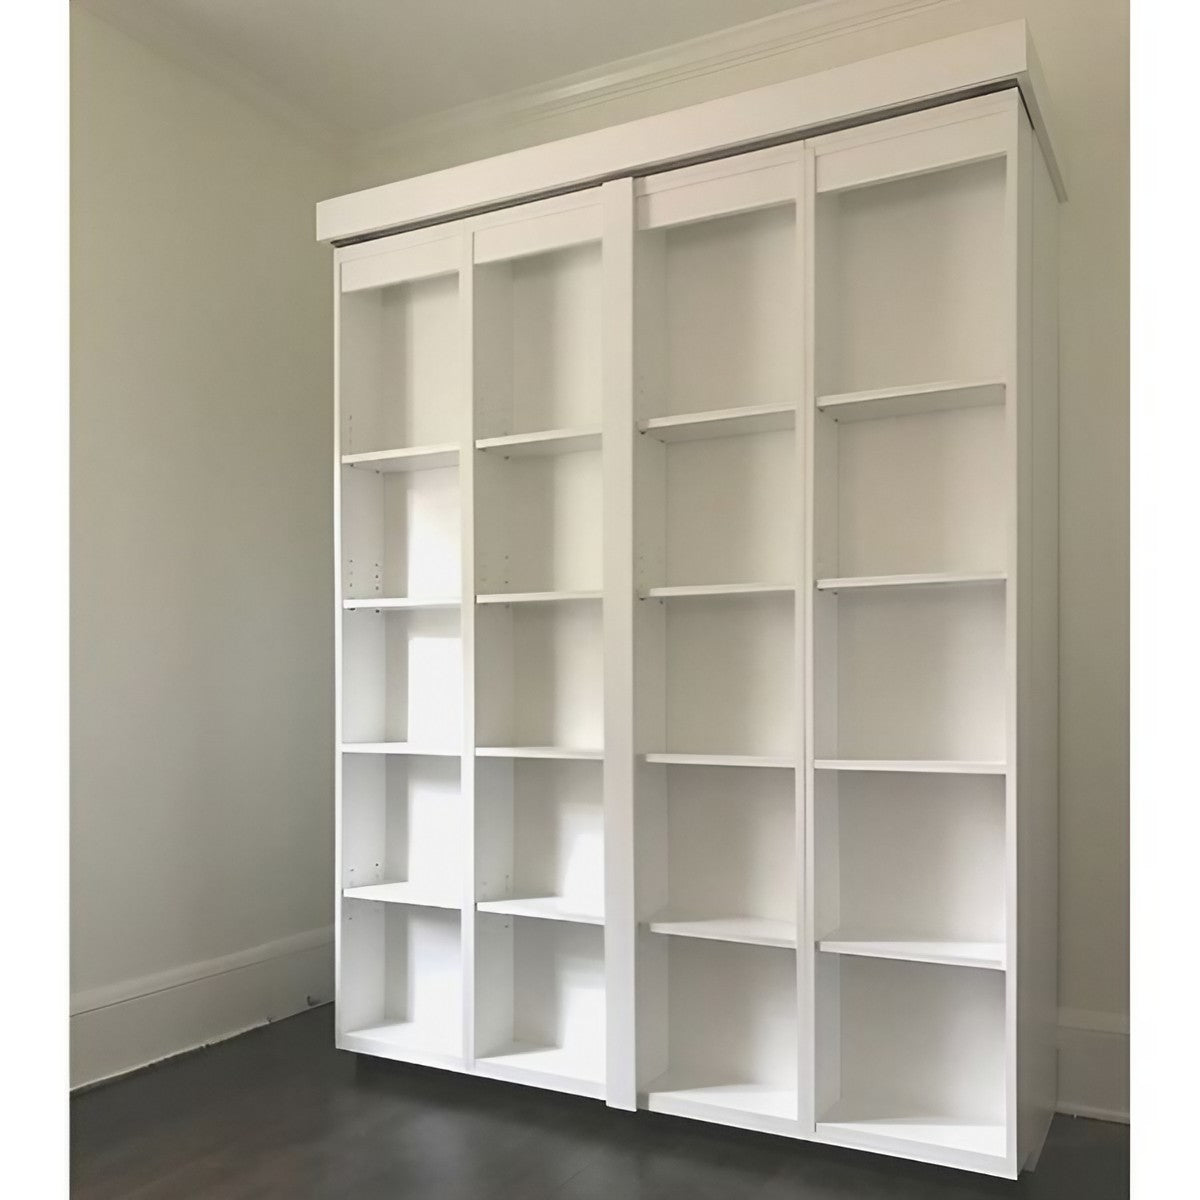 Boaz Murphy Bed with Cabinets - White